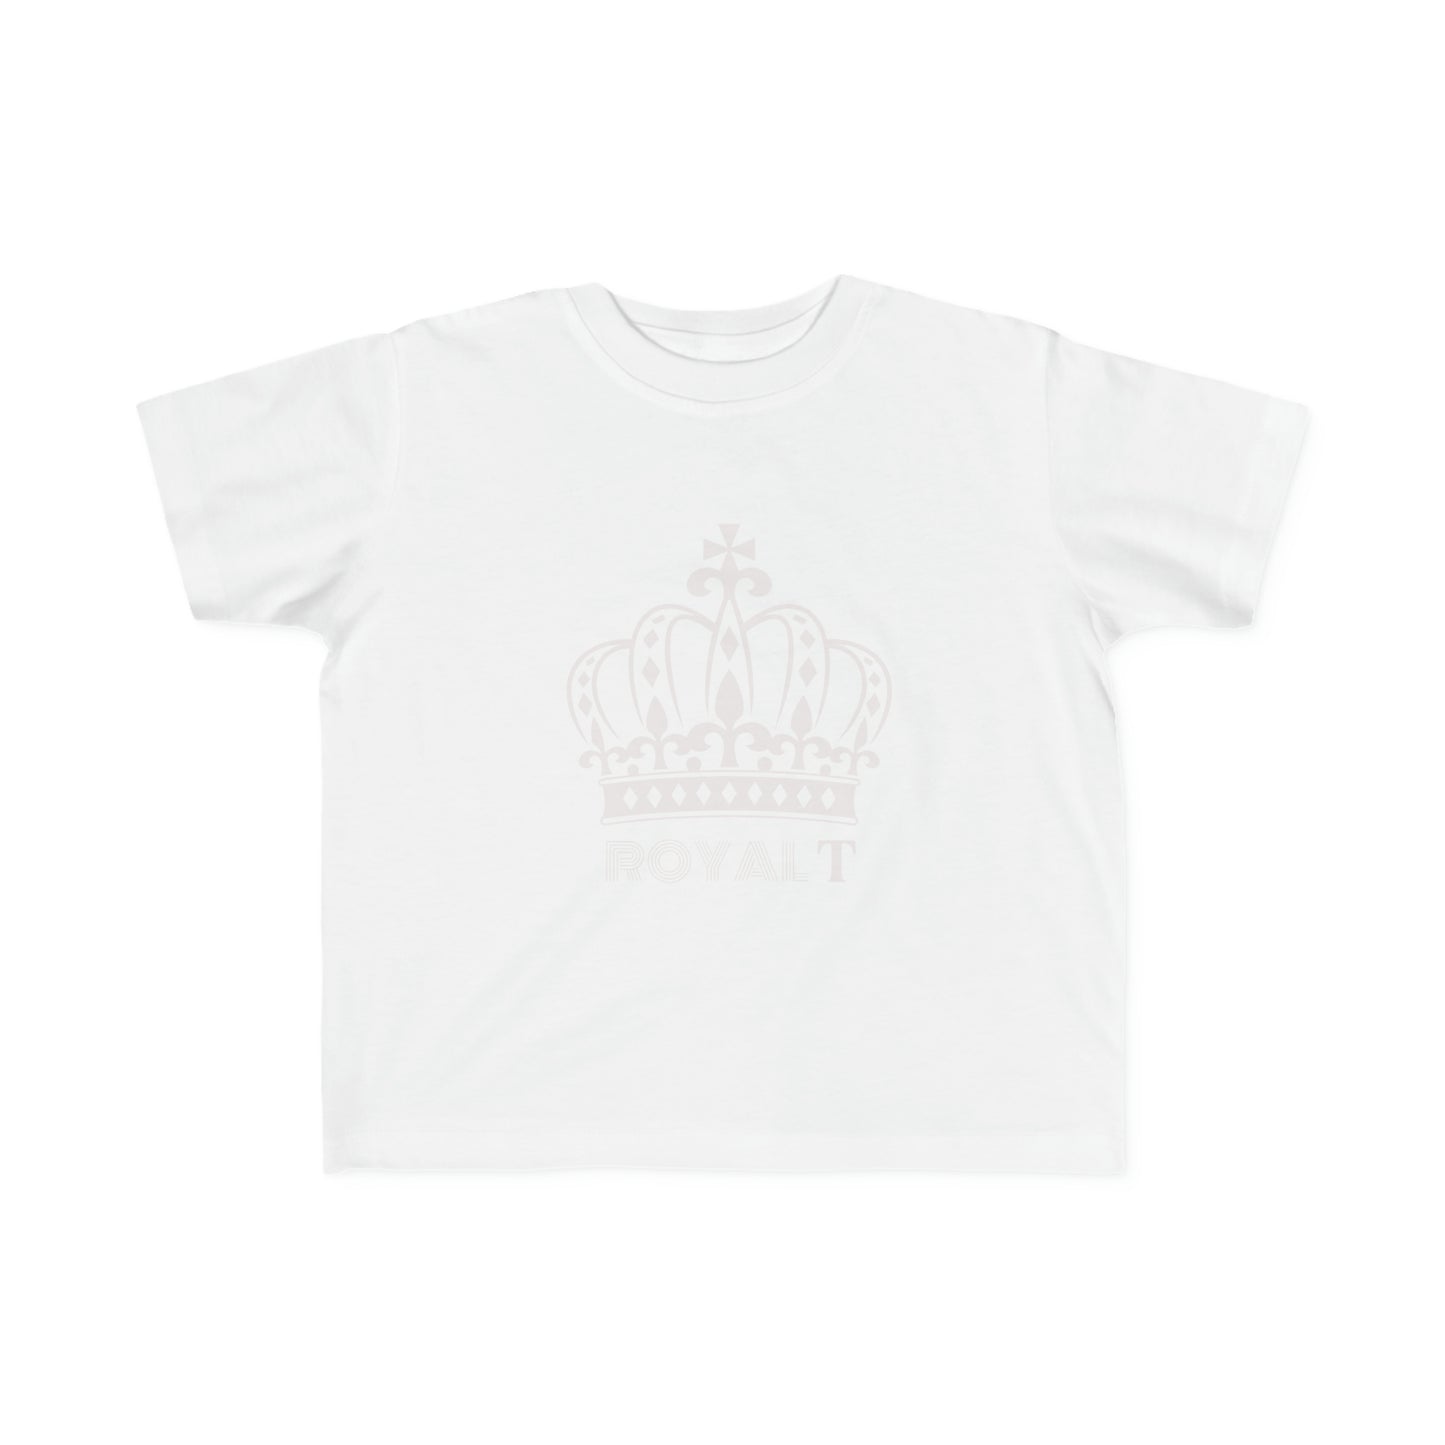 White - Toddler's Fine Jersey Tee - Off White Royal T